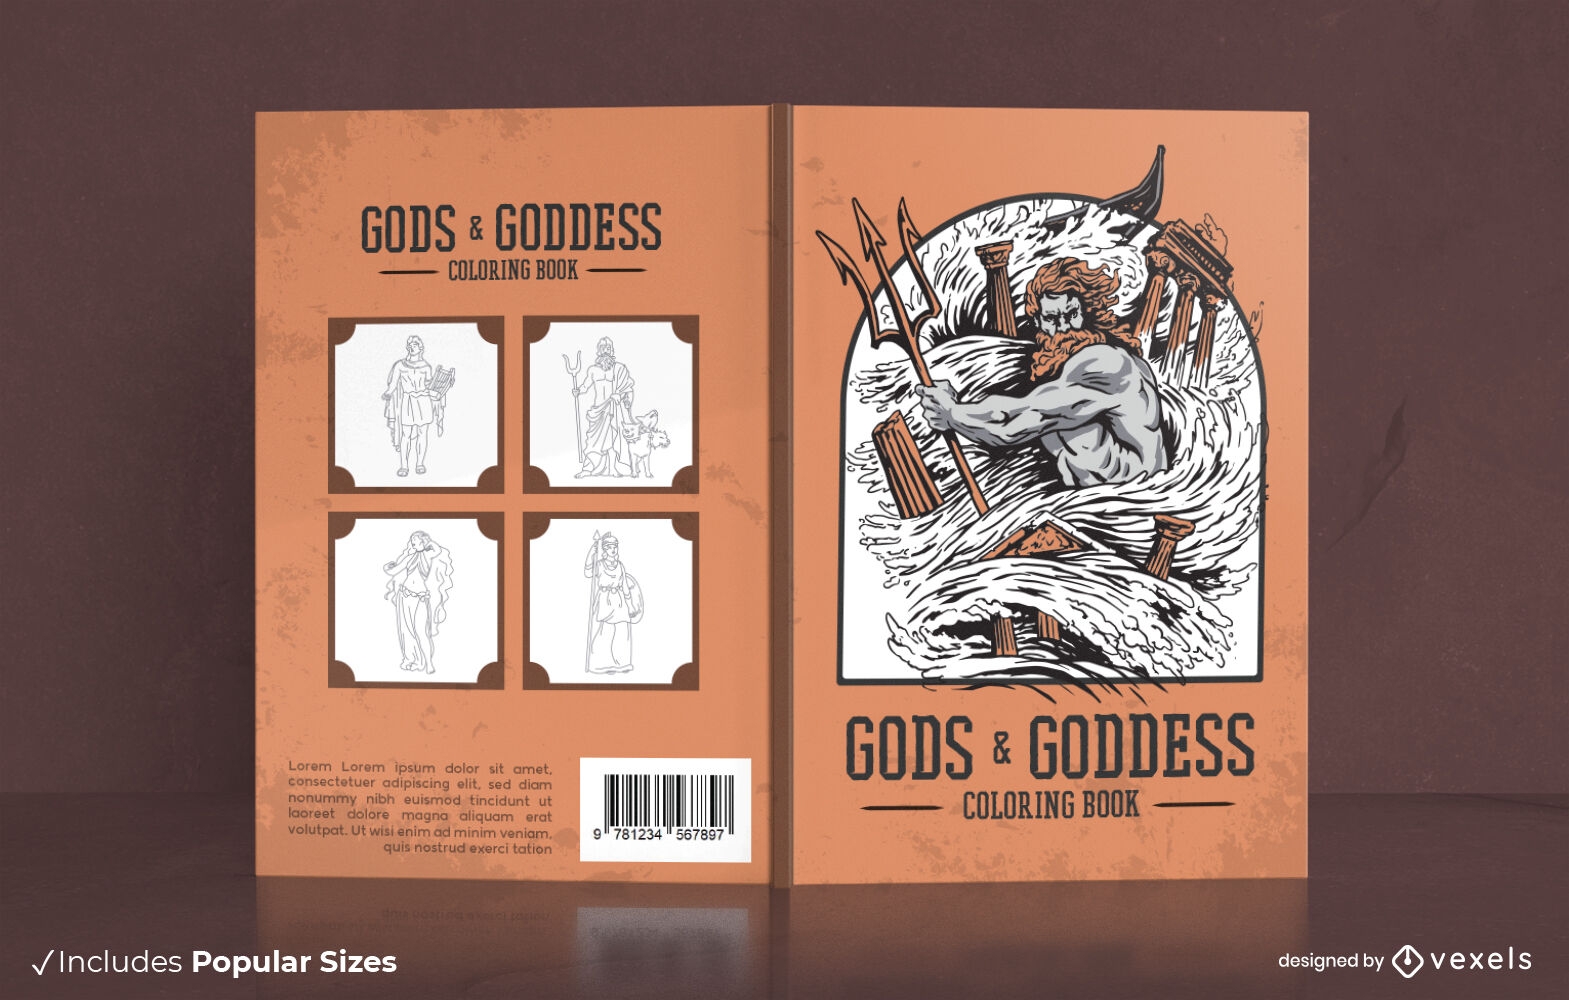 Gods and goddess coloring book cover design